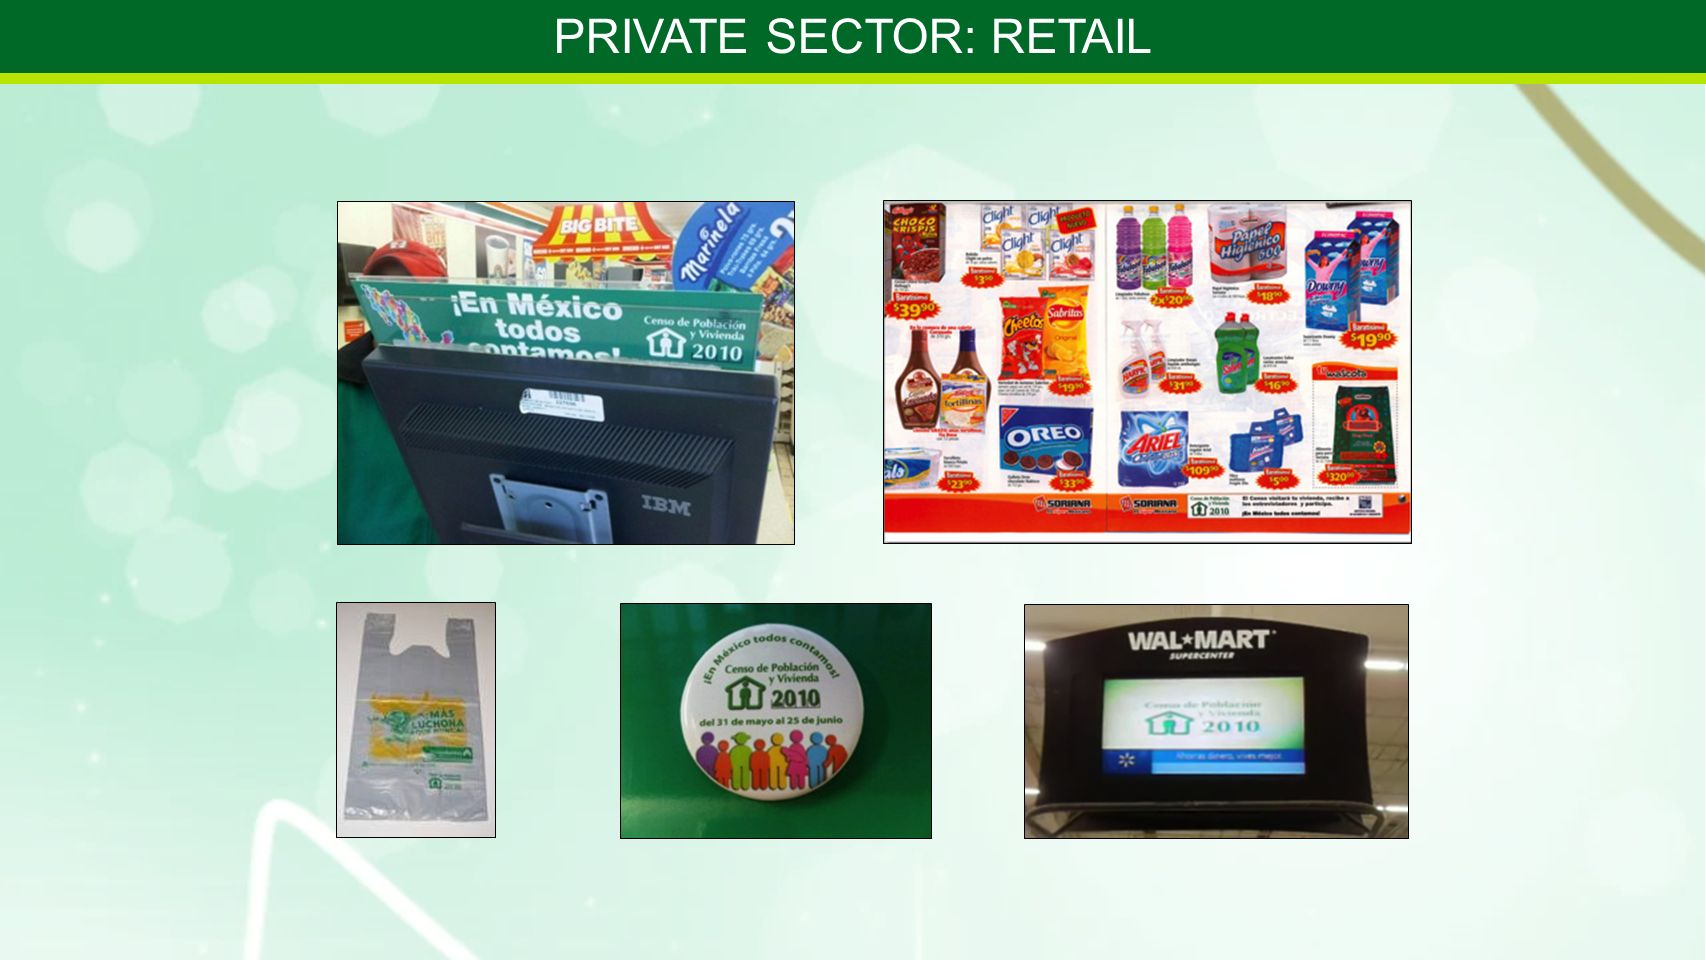 PRIVATE SECTOR: RETAIL